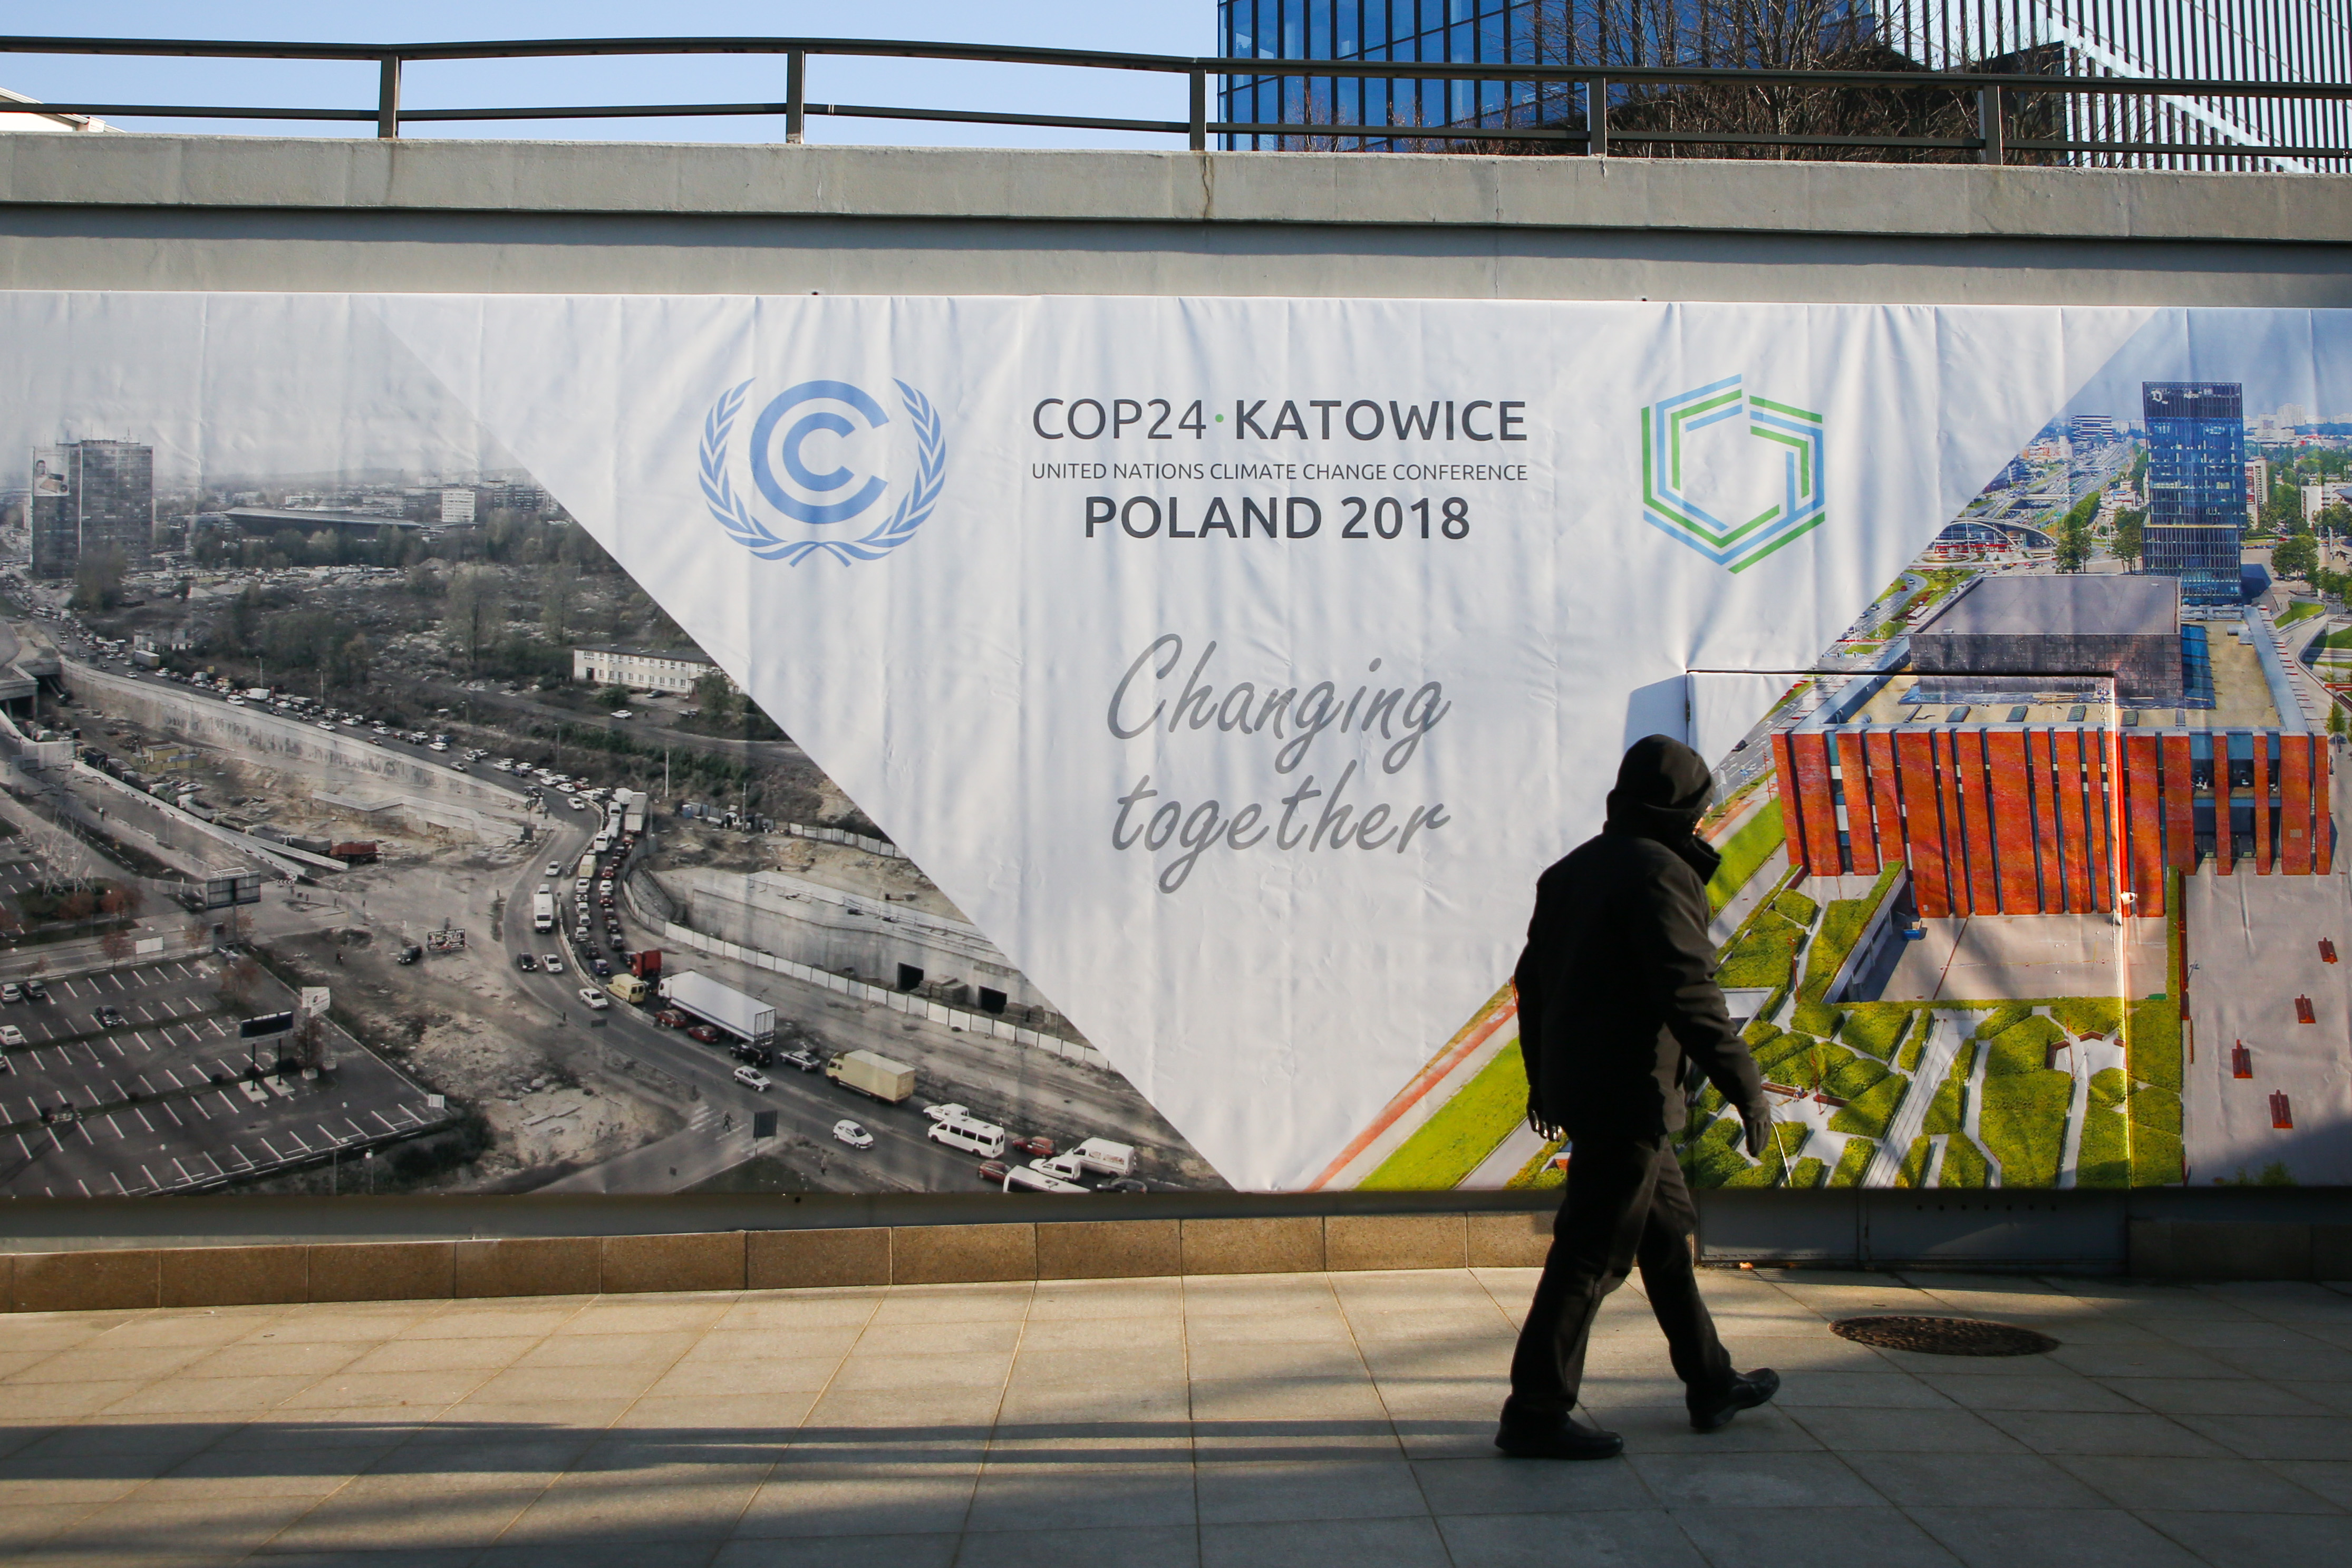 The city of Katowice is ready for COP24, the 24th Conference of the Parties to the United Nations Framework Convention on Climate Change.